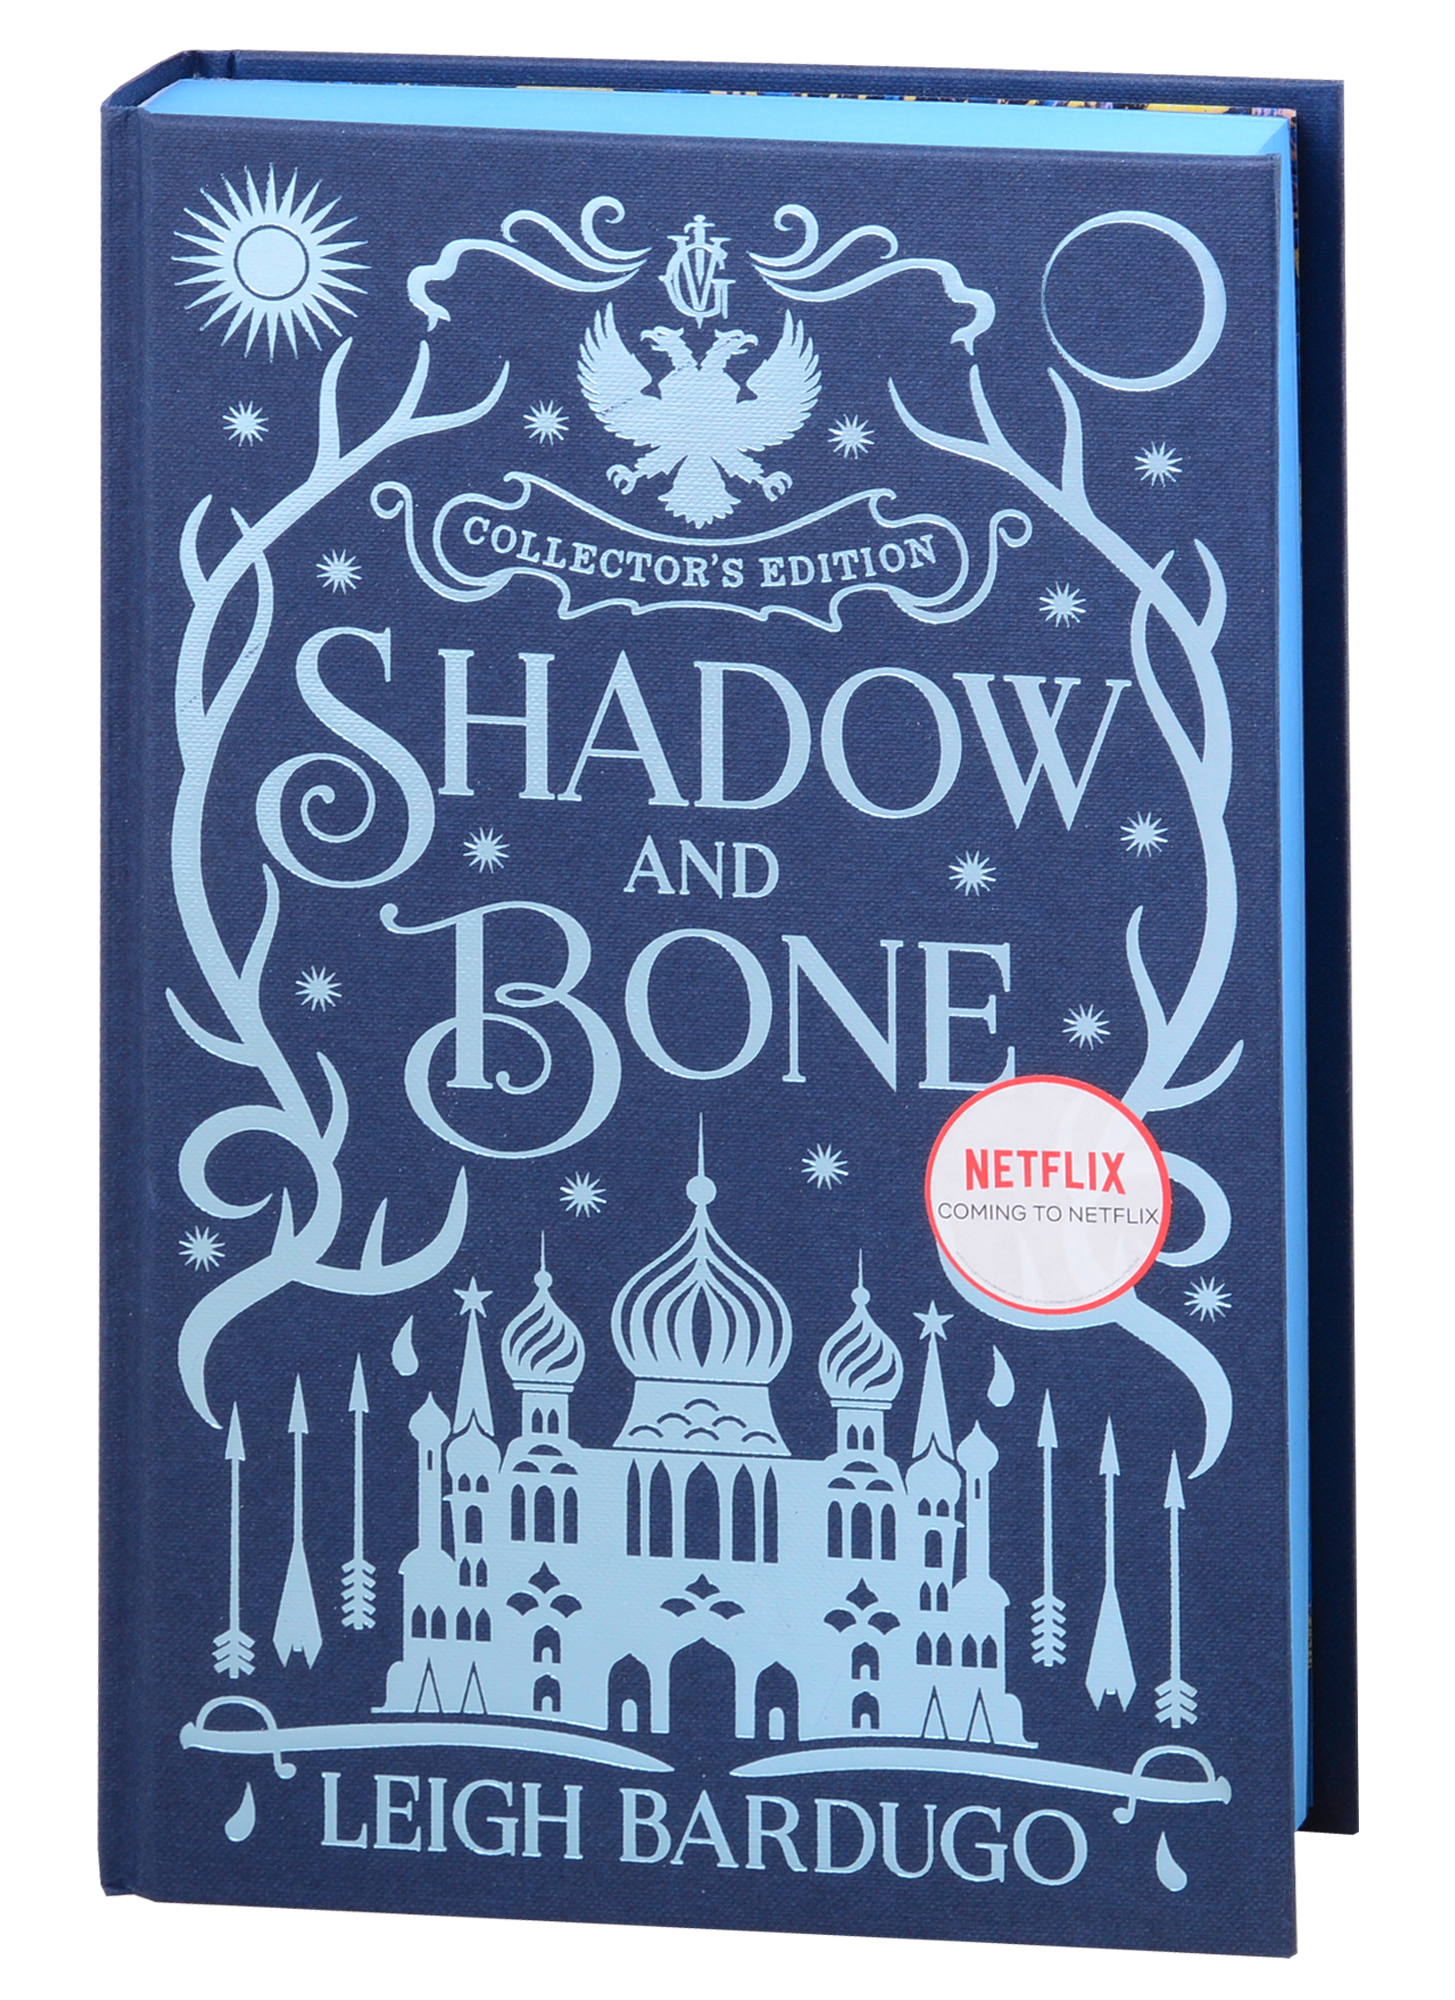 bardugo leigh ruin and rising book 3 shadow and bone Bardugo Leigh Shadow and Bone